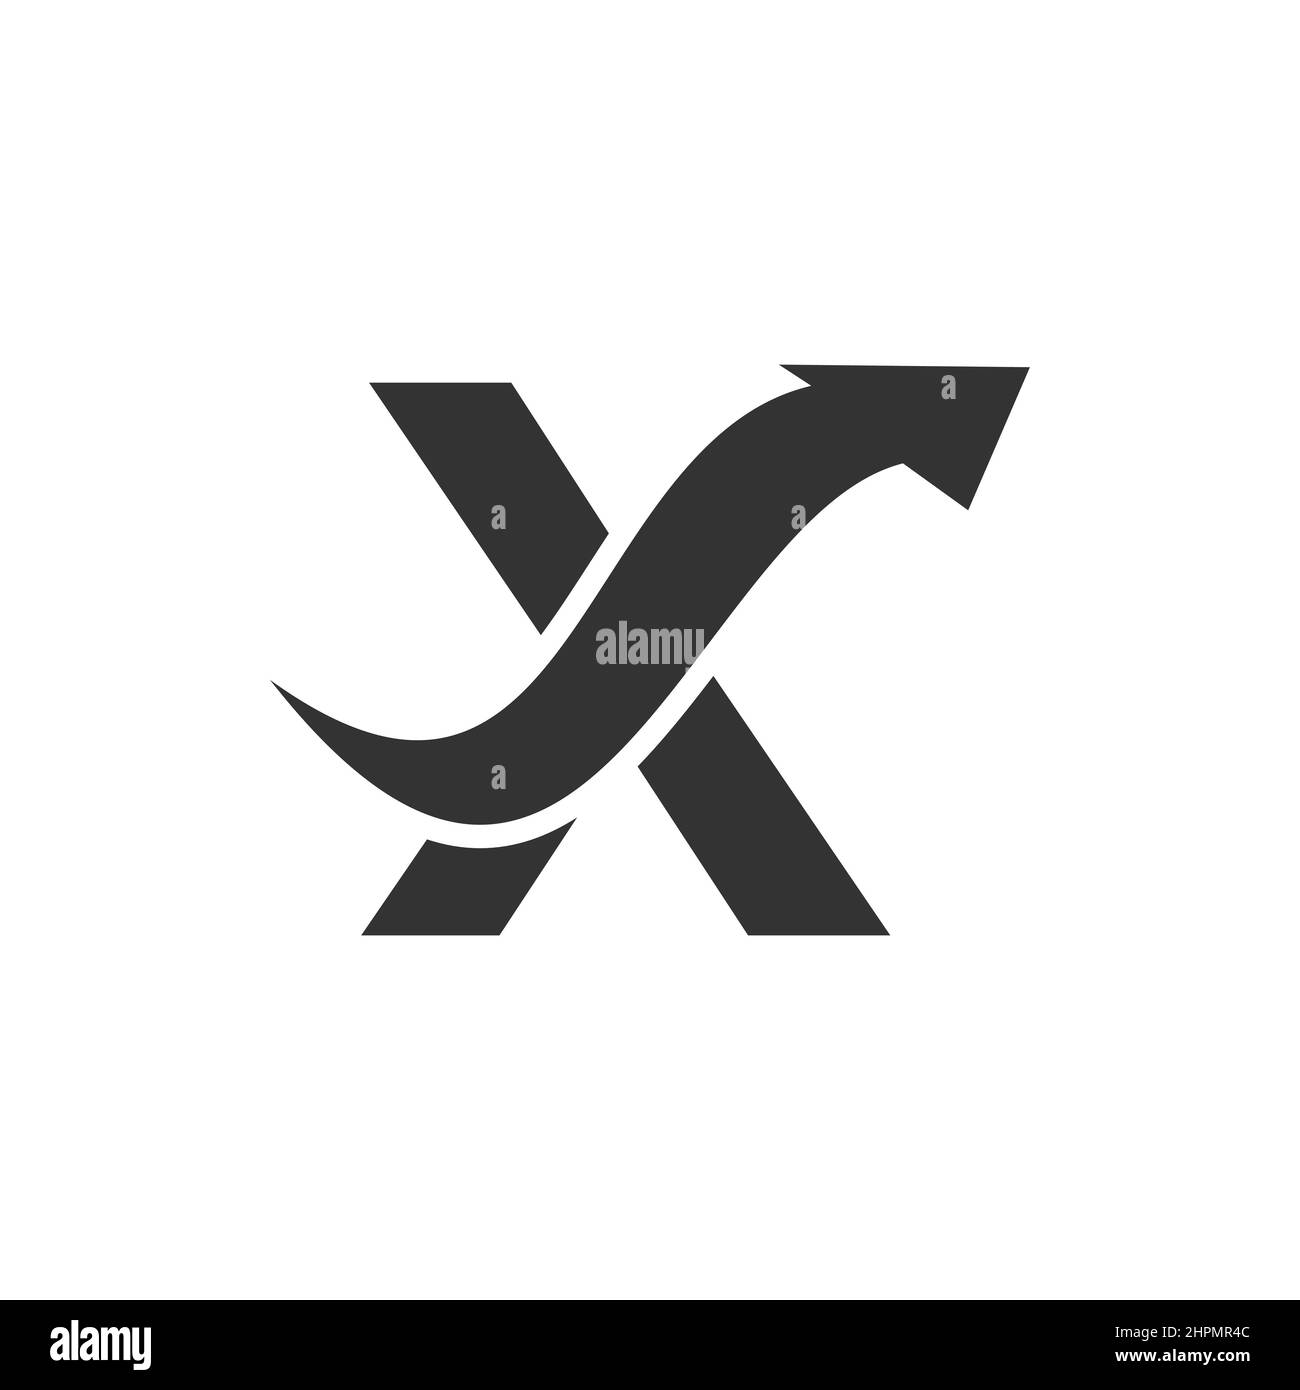 Finance Logo With X Letter Concept. Marketing And Financial Business Logo. Letter X Financial Logo Template With Marketing Growth Arrow Stock Vector